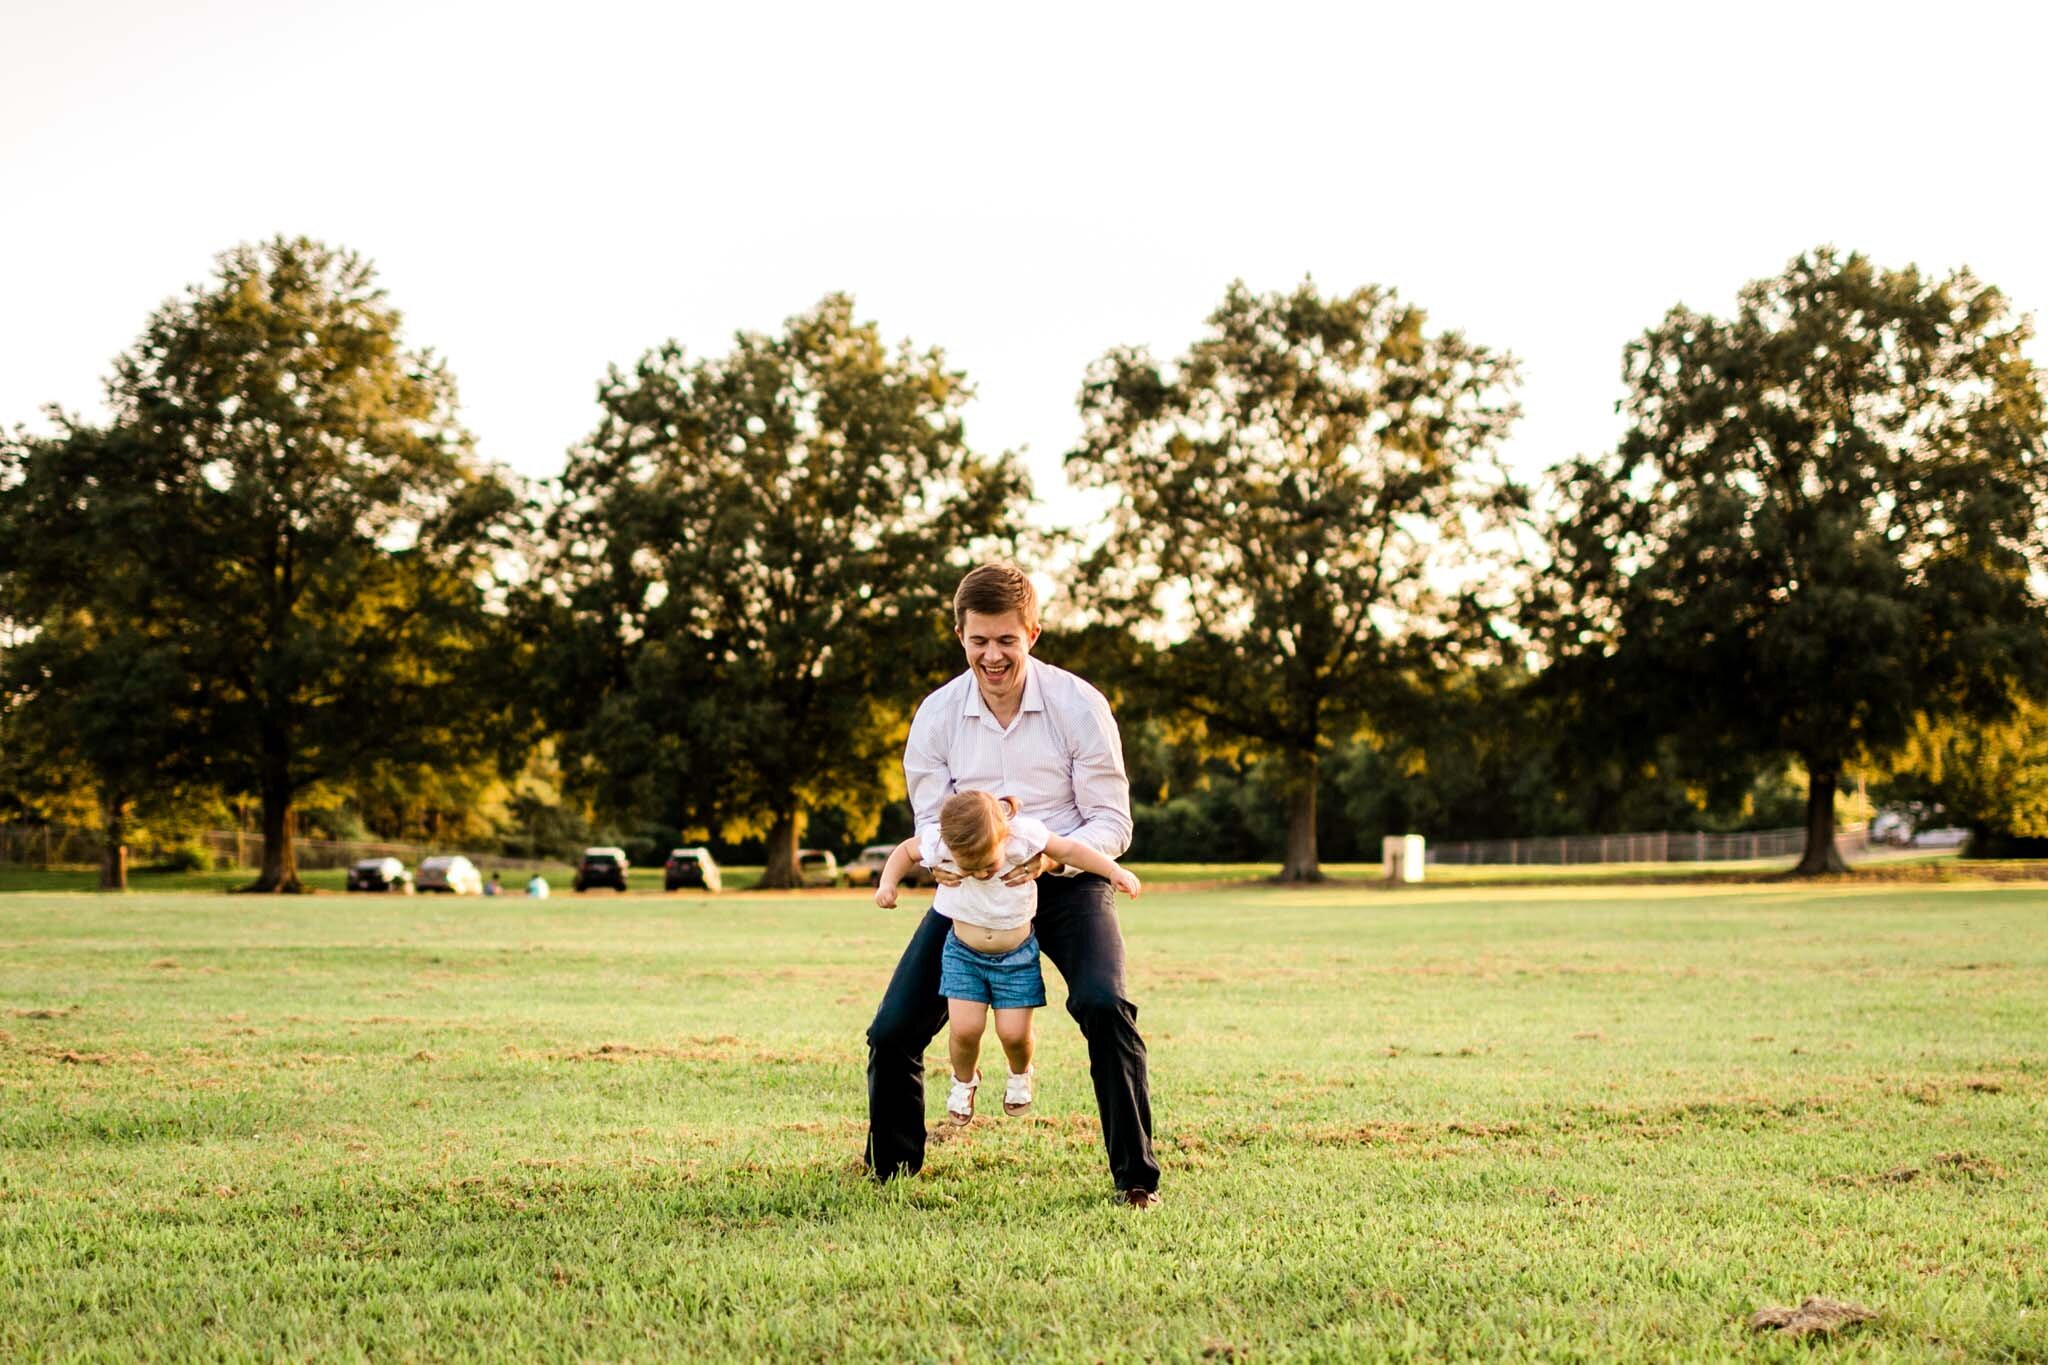 Raleigh Family Photography at Dix Park | By G. Lin Photography | Dad playing with daughter in open field